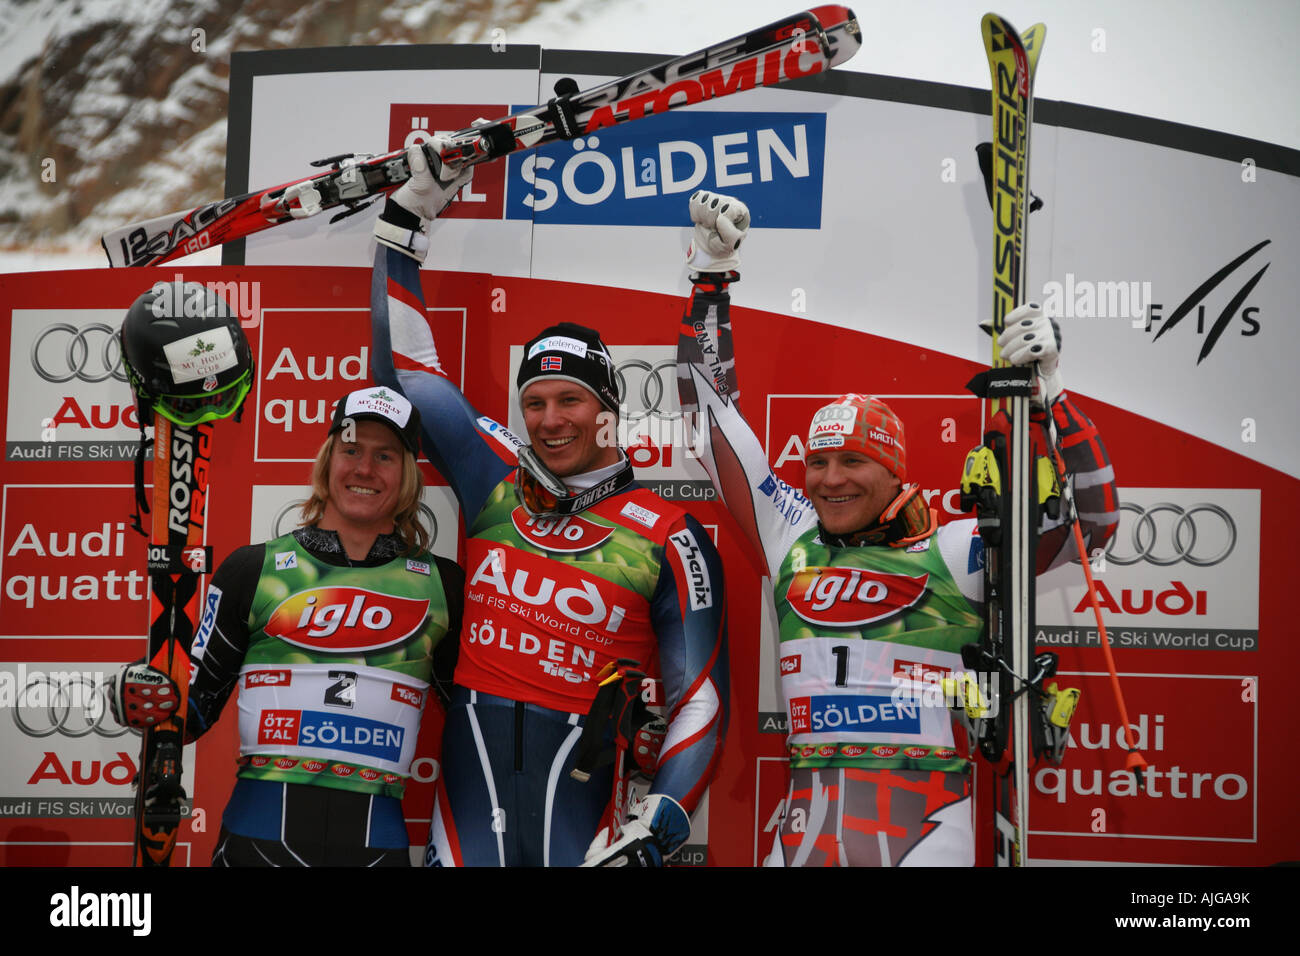 Winners Podium Skiing world cup Giant Slalom Solden Austria October 2007 Ted Ligety Axel Lund Svindal Kalle Palander Stock Photo